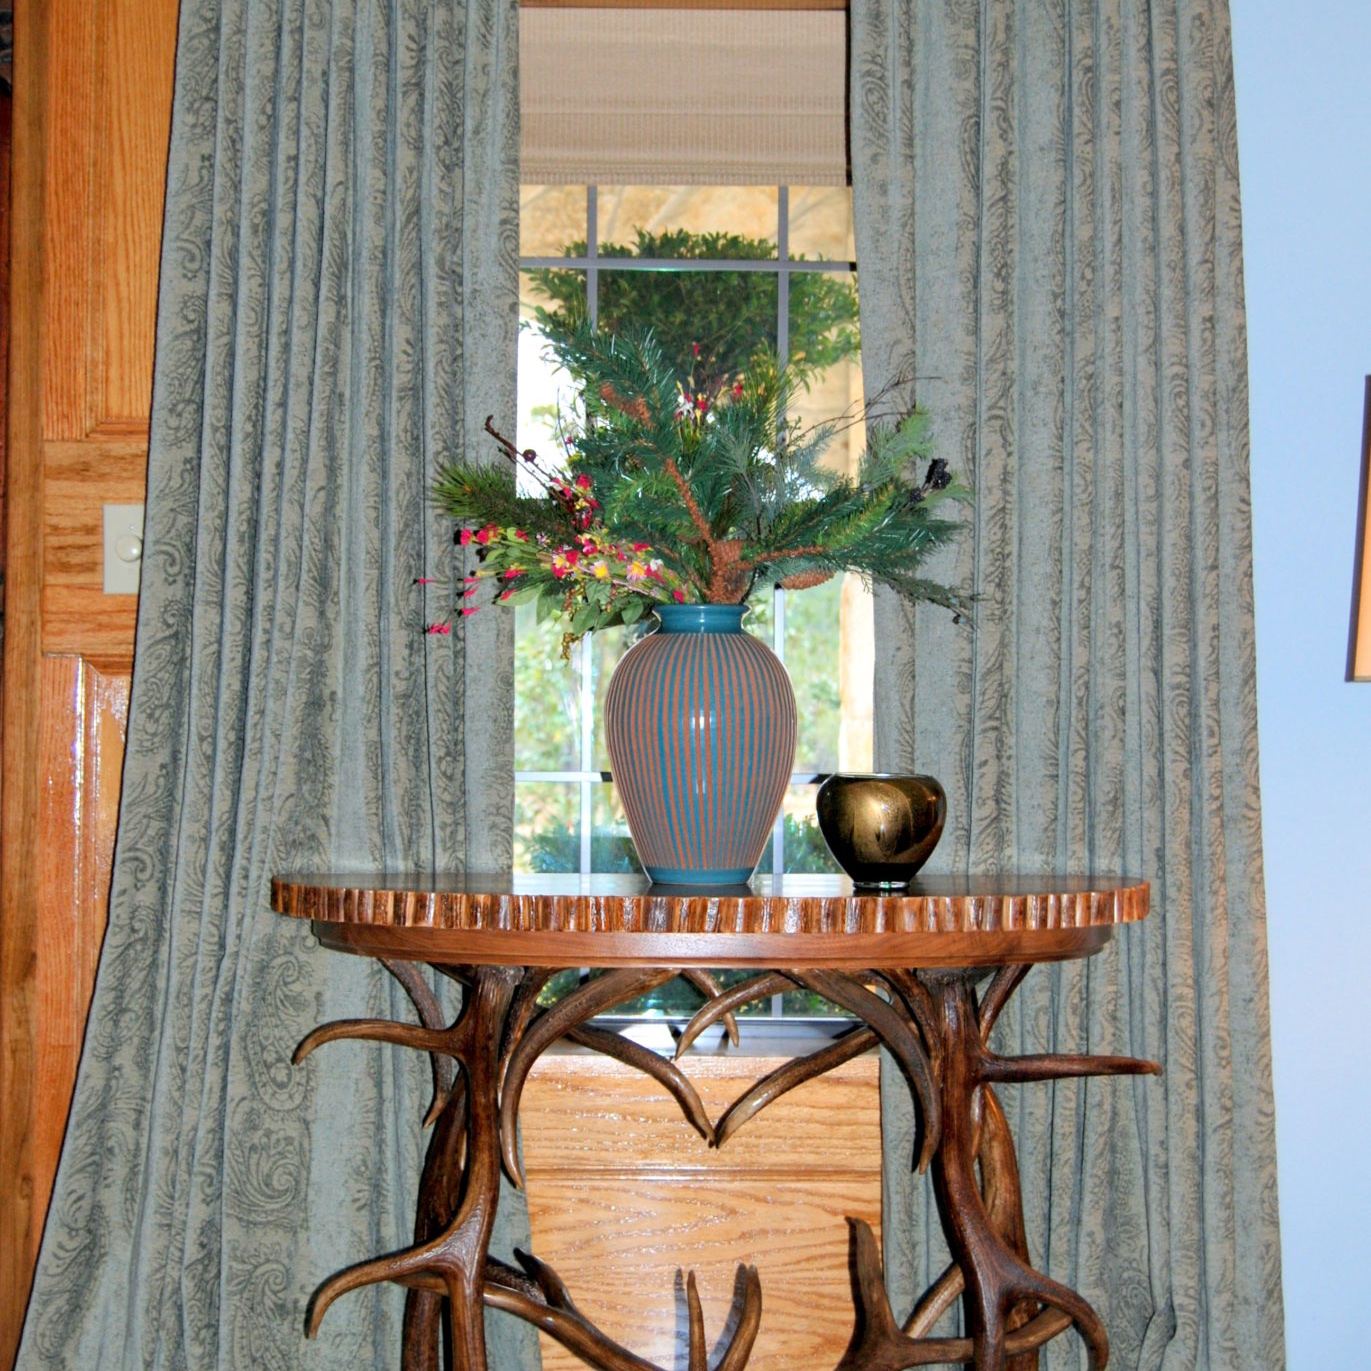 Rustic antler table with a plant by a window